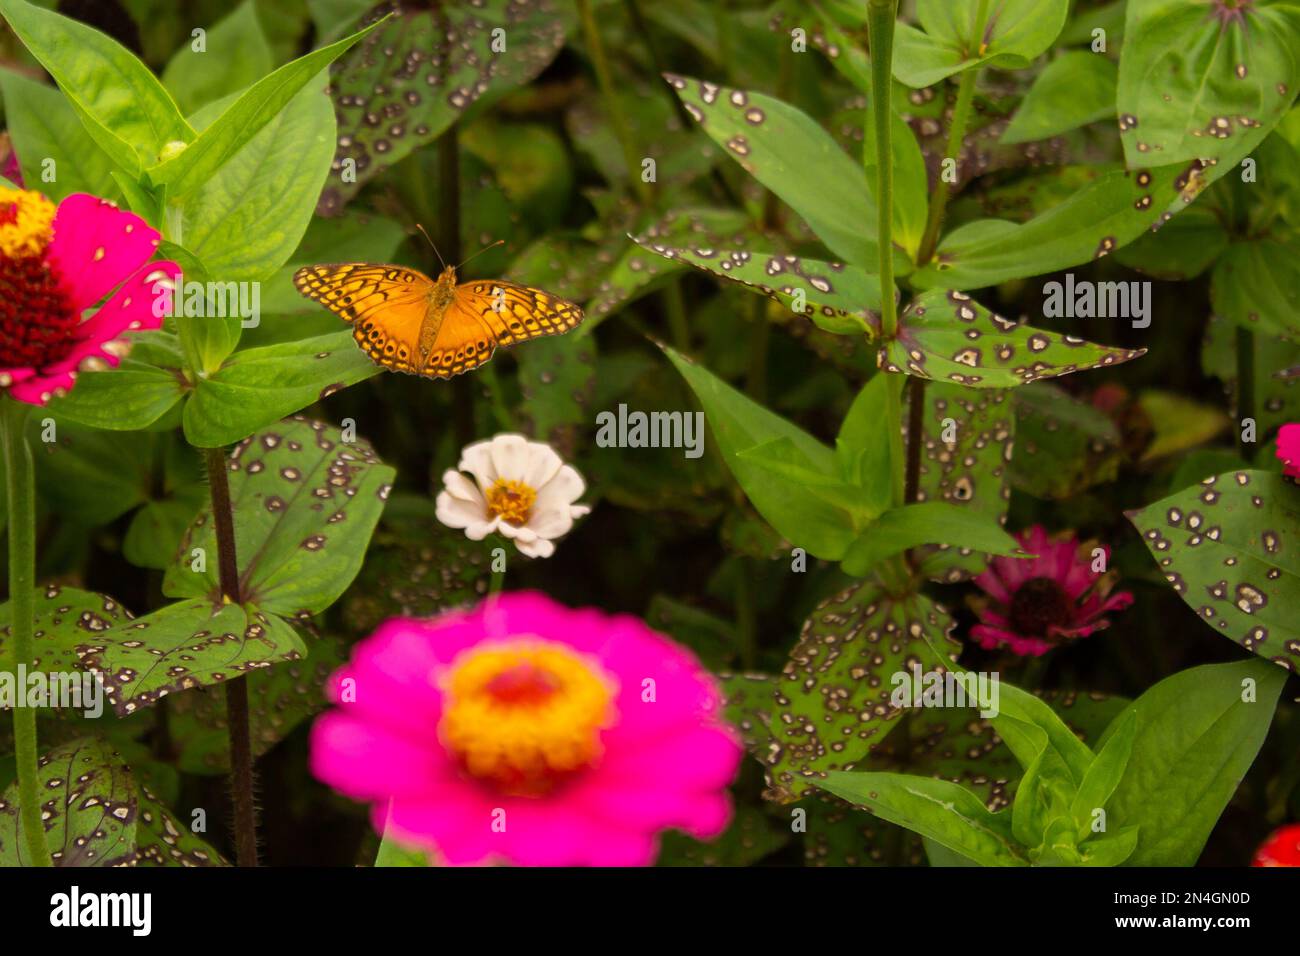 Goiania, Goiás, Brazil – January 08, 2023:  An orange-colored butterfly perched on a green leaf in a garden full of zinnias that have diseased, fungus Stock Photo